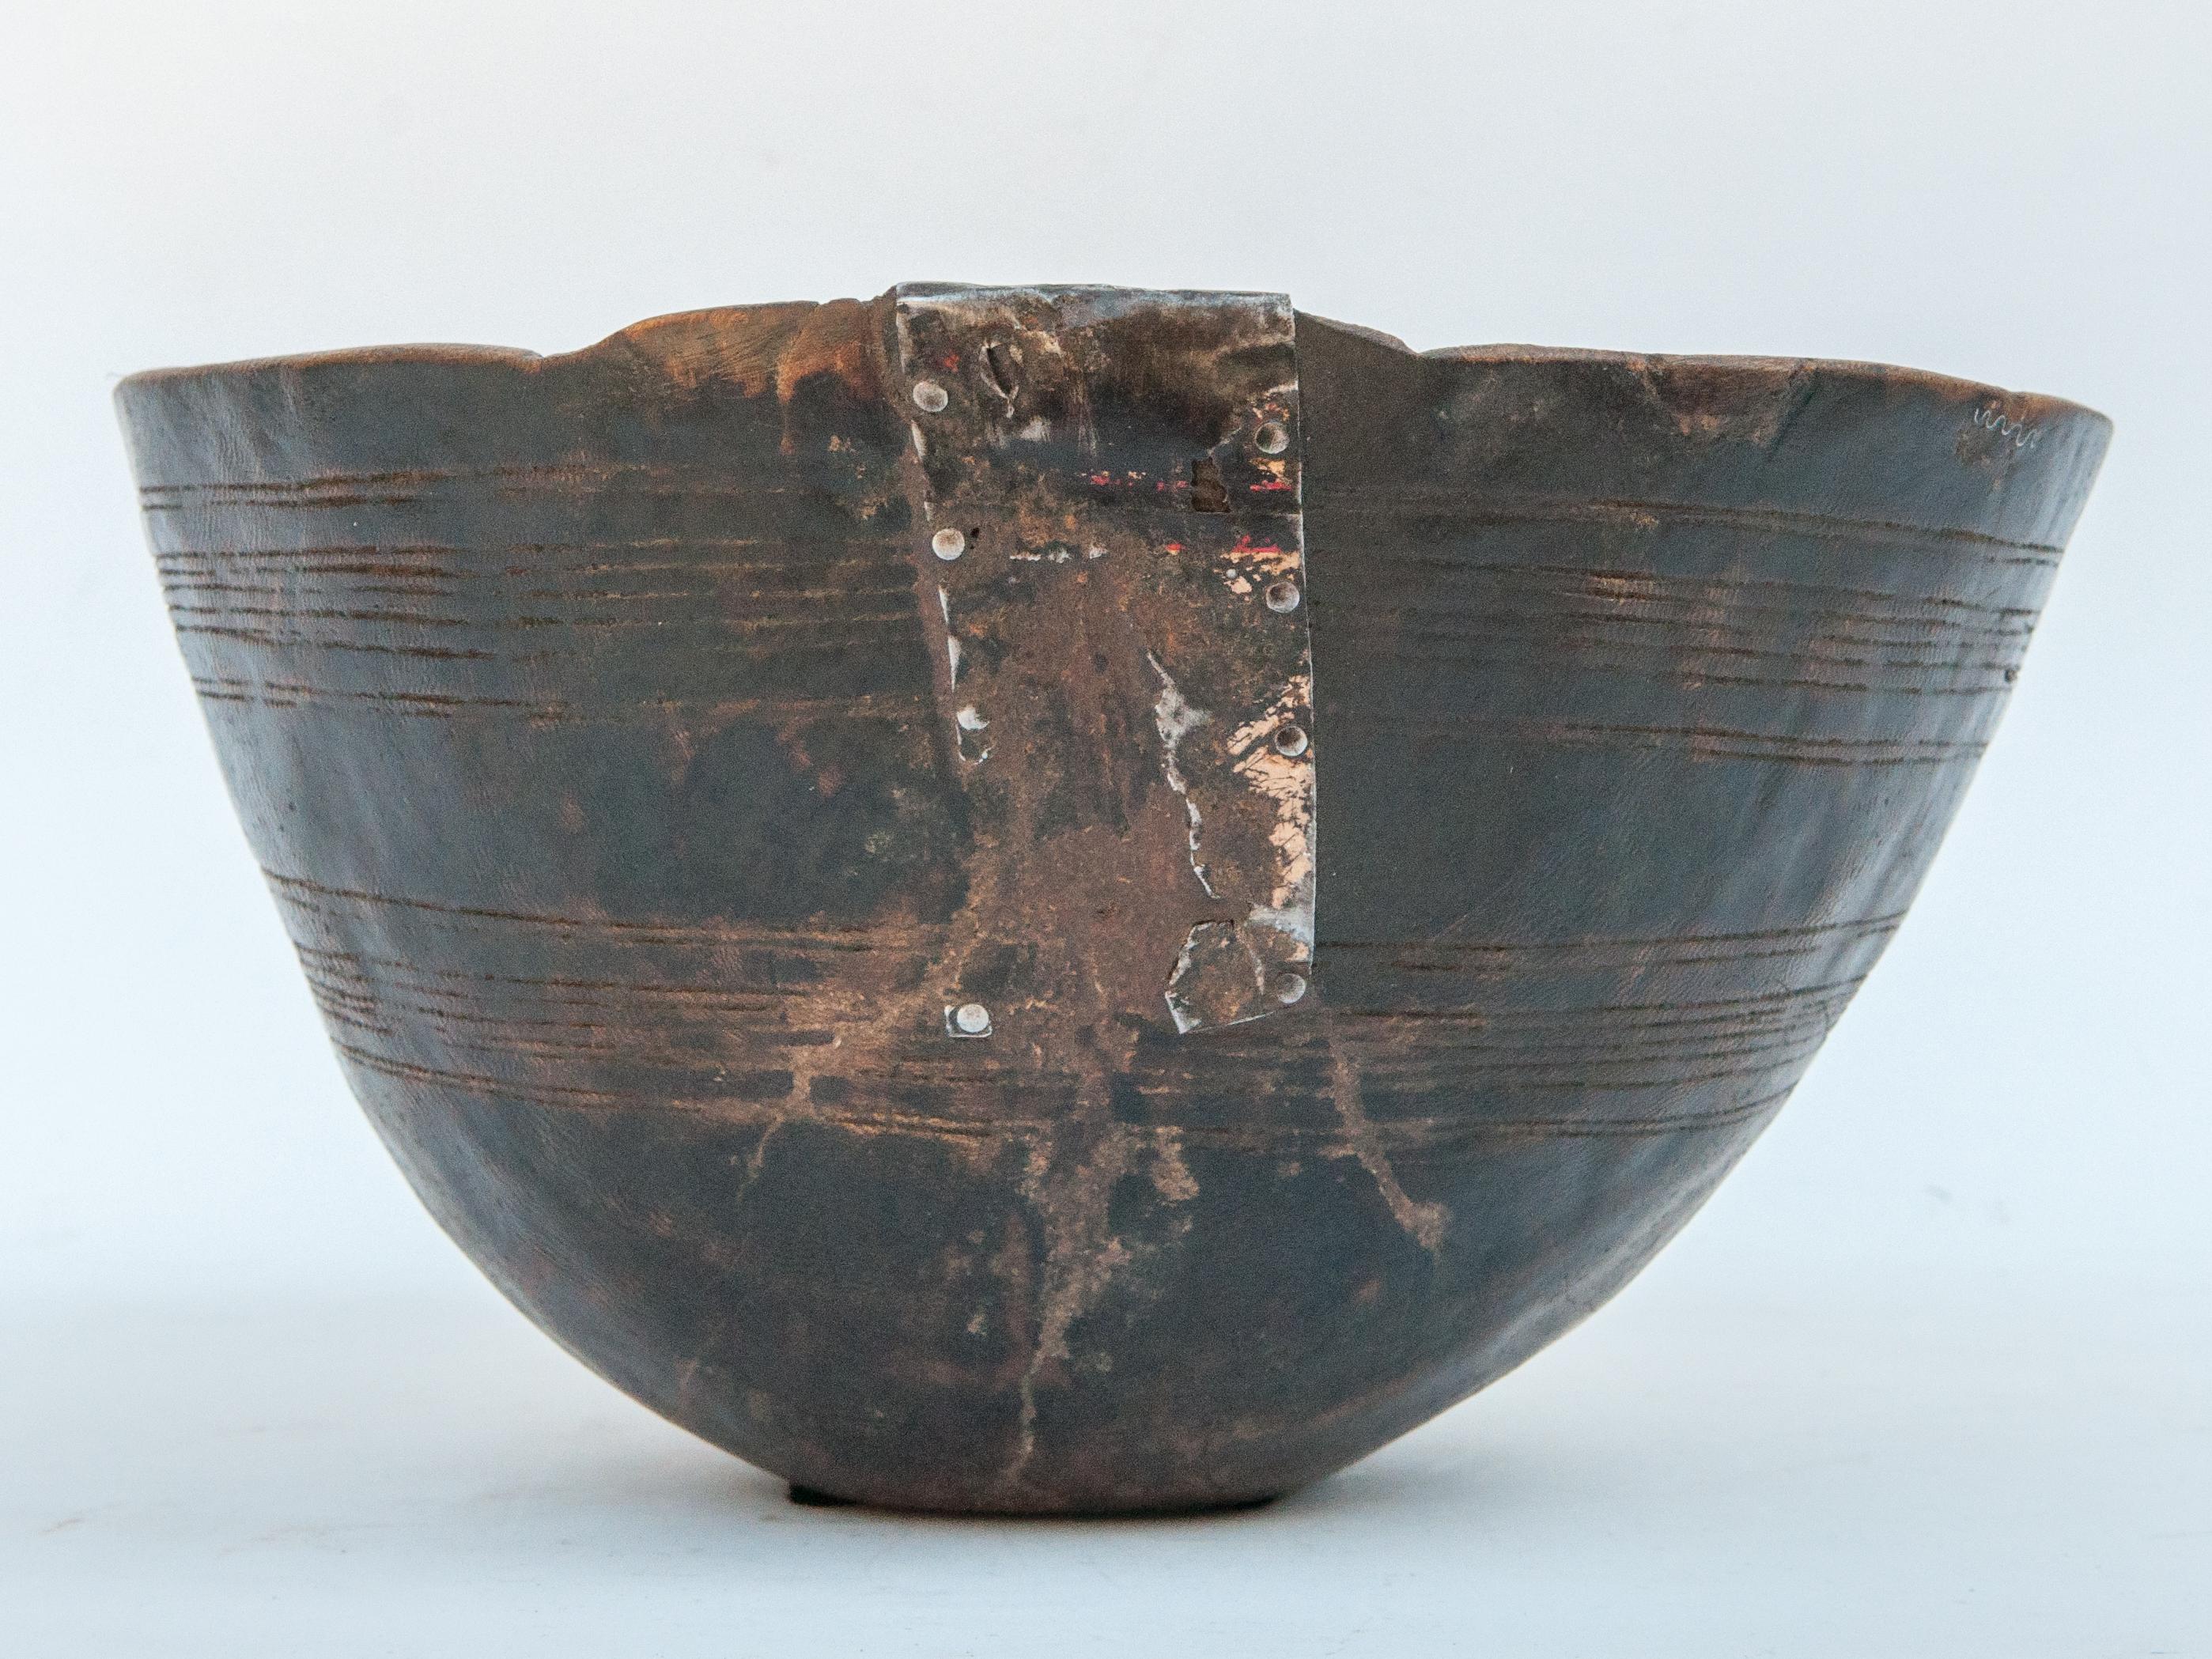 Tribal handhewn wooden bowl with original metal repair. From the Fulani people of Niger, mid-20th century.
Offered by Bruce Hughes.
This rustic wooden bowl was fashioned by hand from a single piece of wood using very basic tools. Original metal